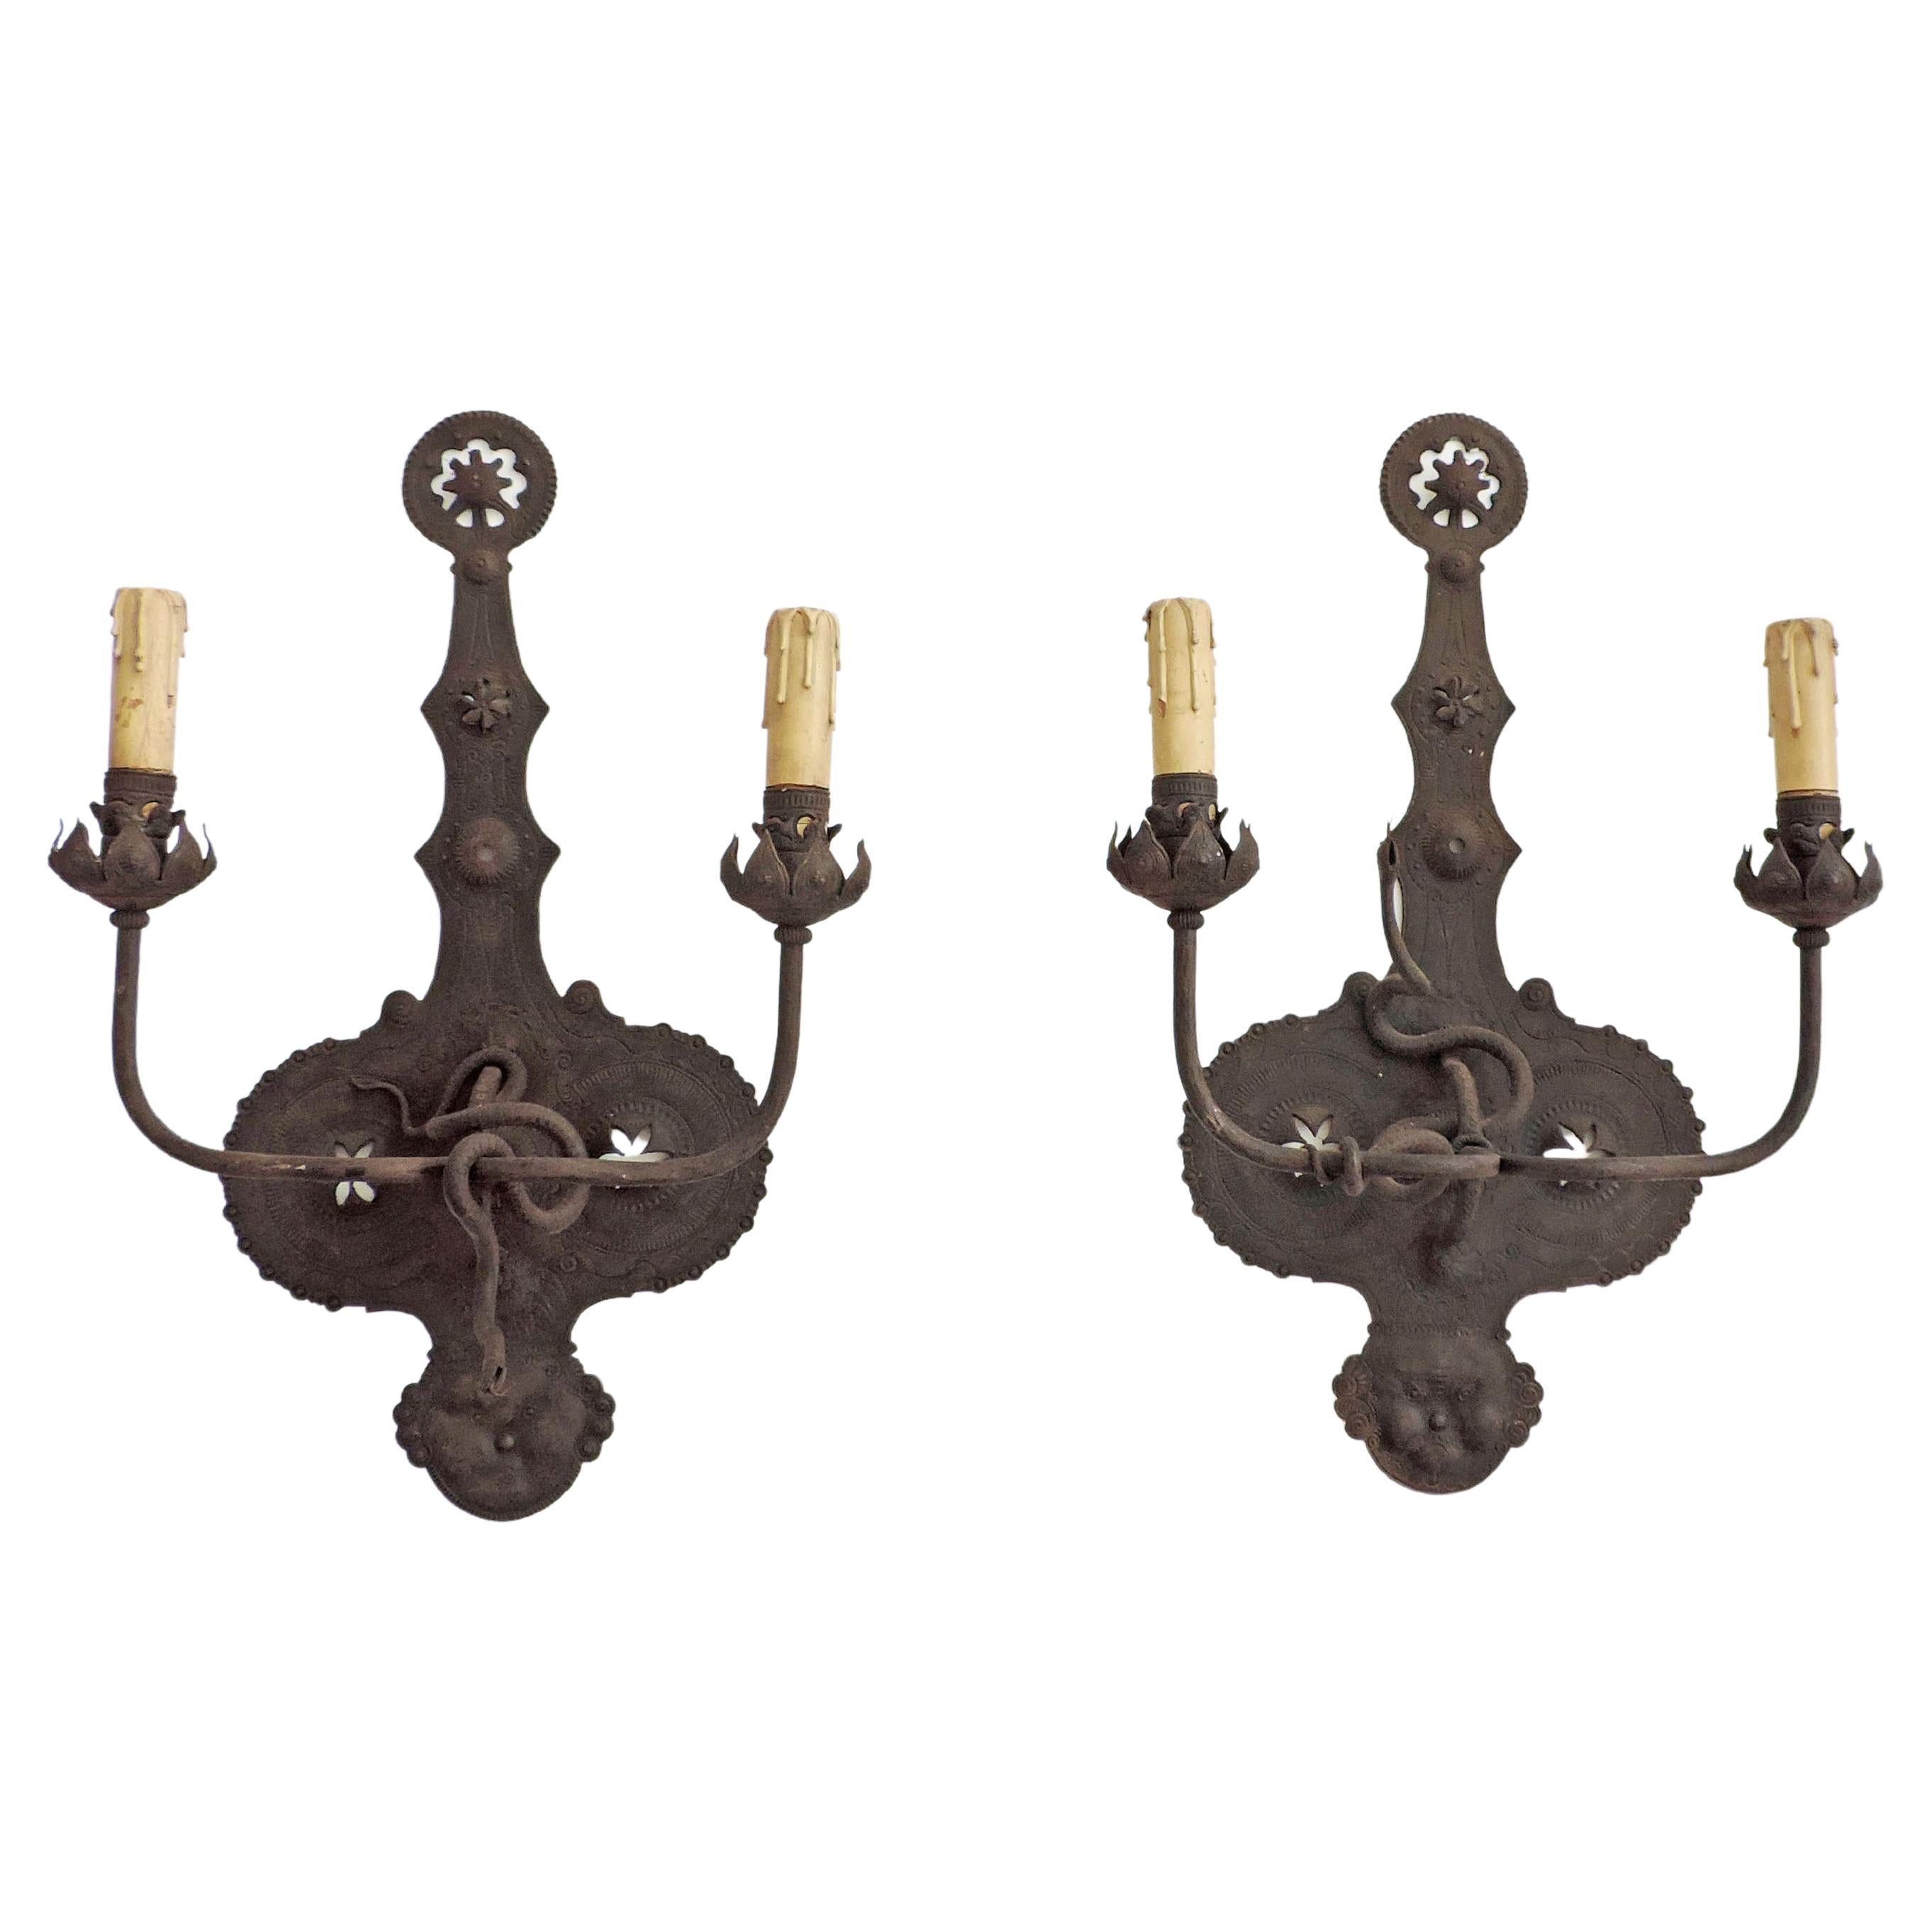 Italian Finely Engraved Art Deco Wrought Iron Appliques, 1920s For Sale